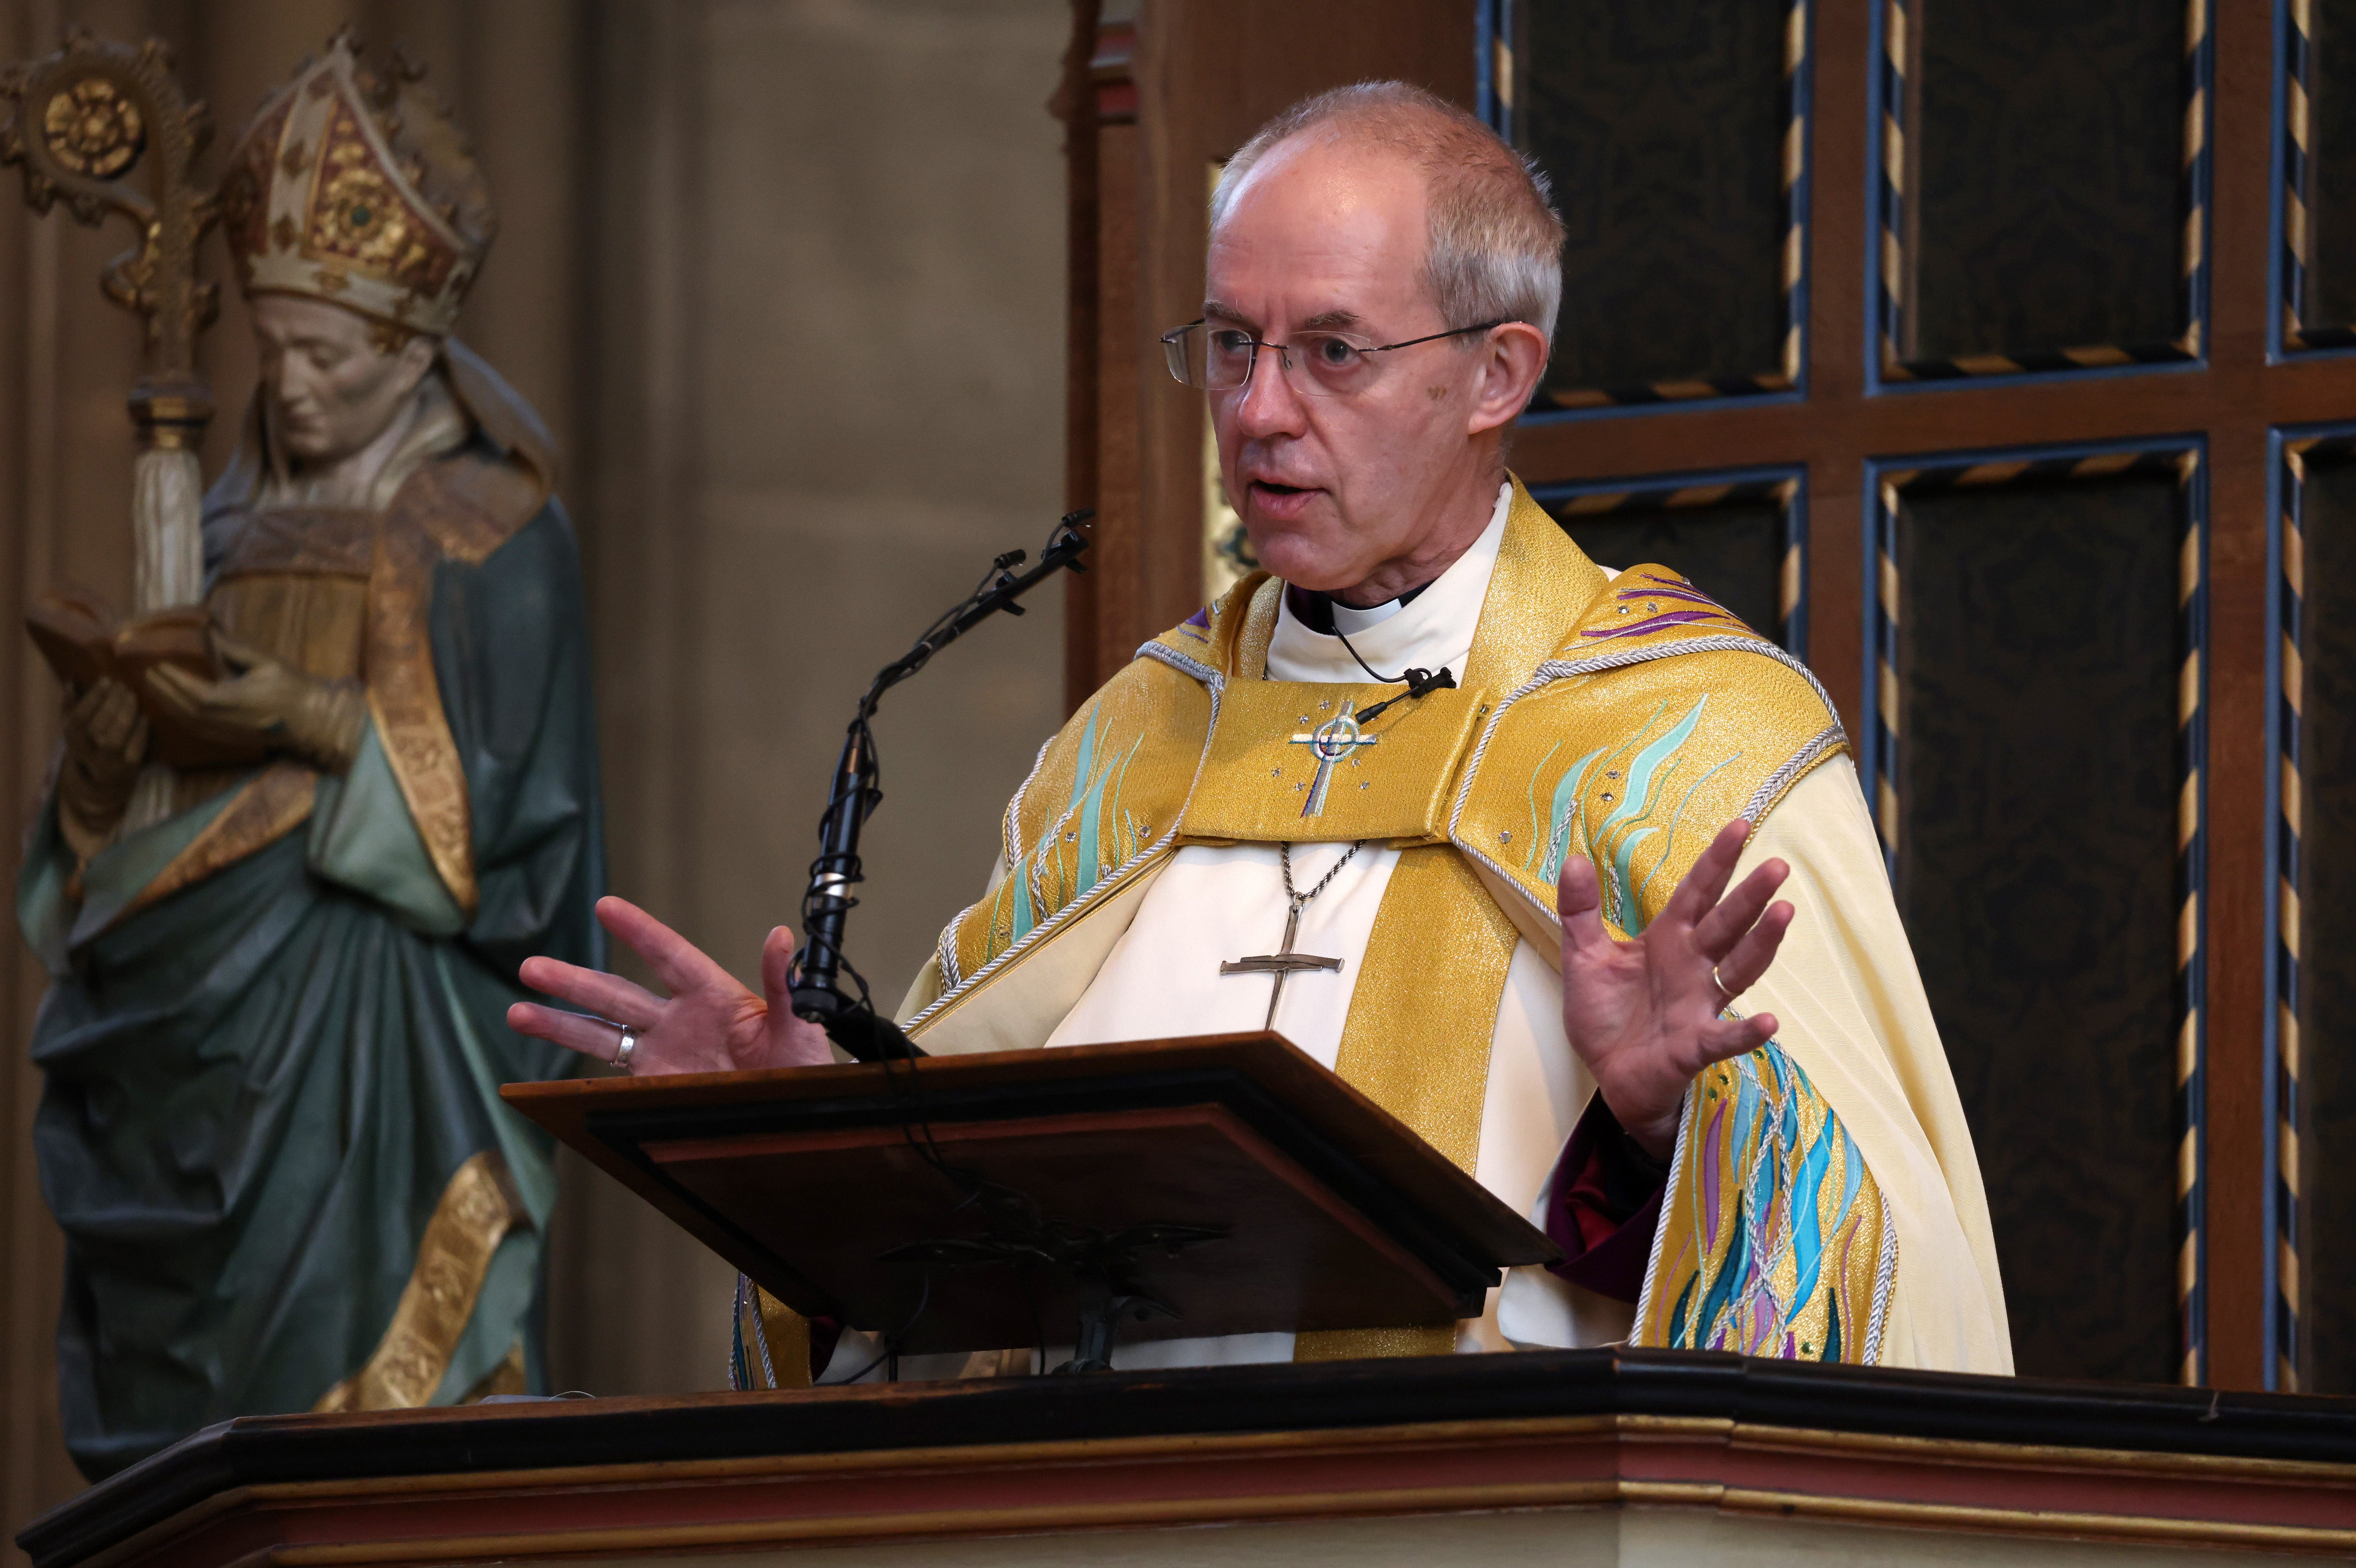 Justin Welby has offered a perfect fix for the refugee crisis